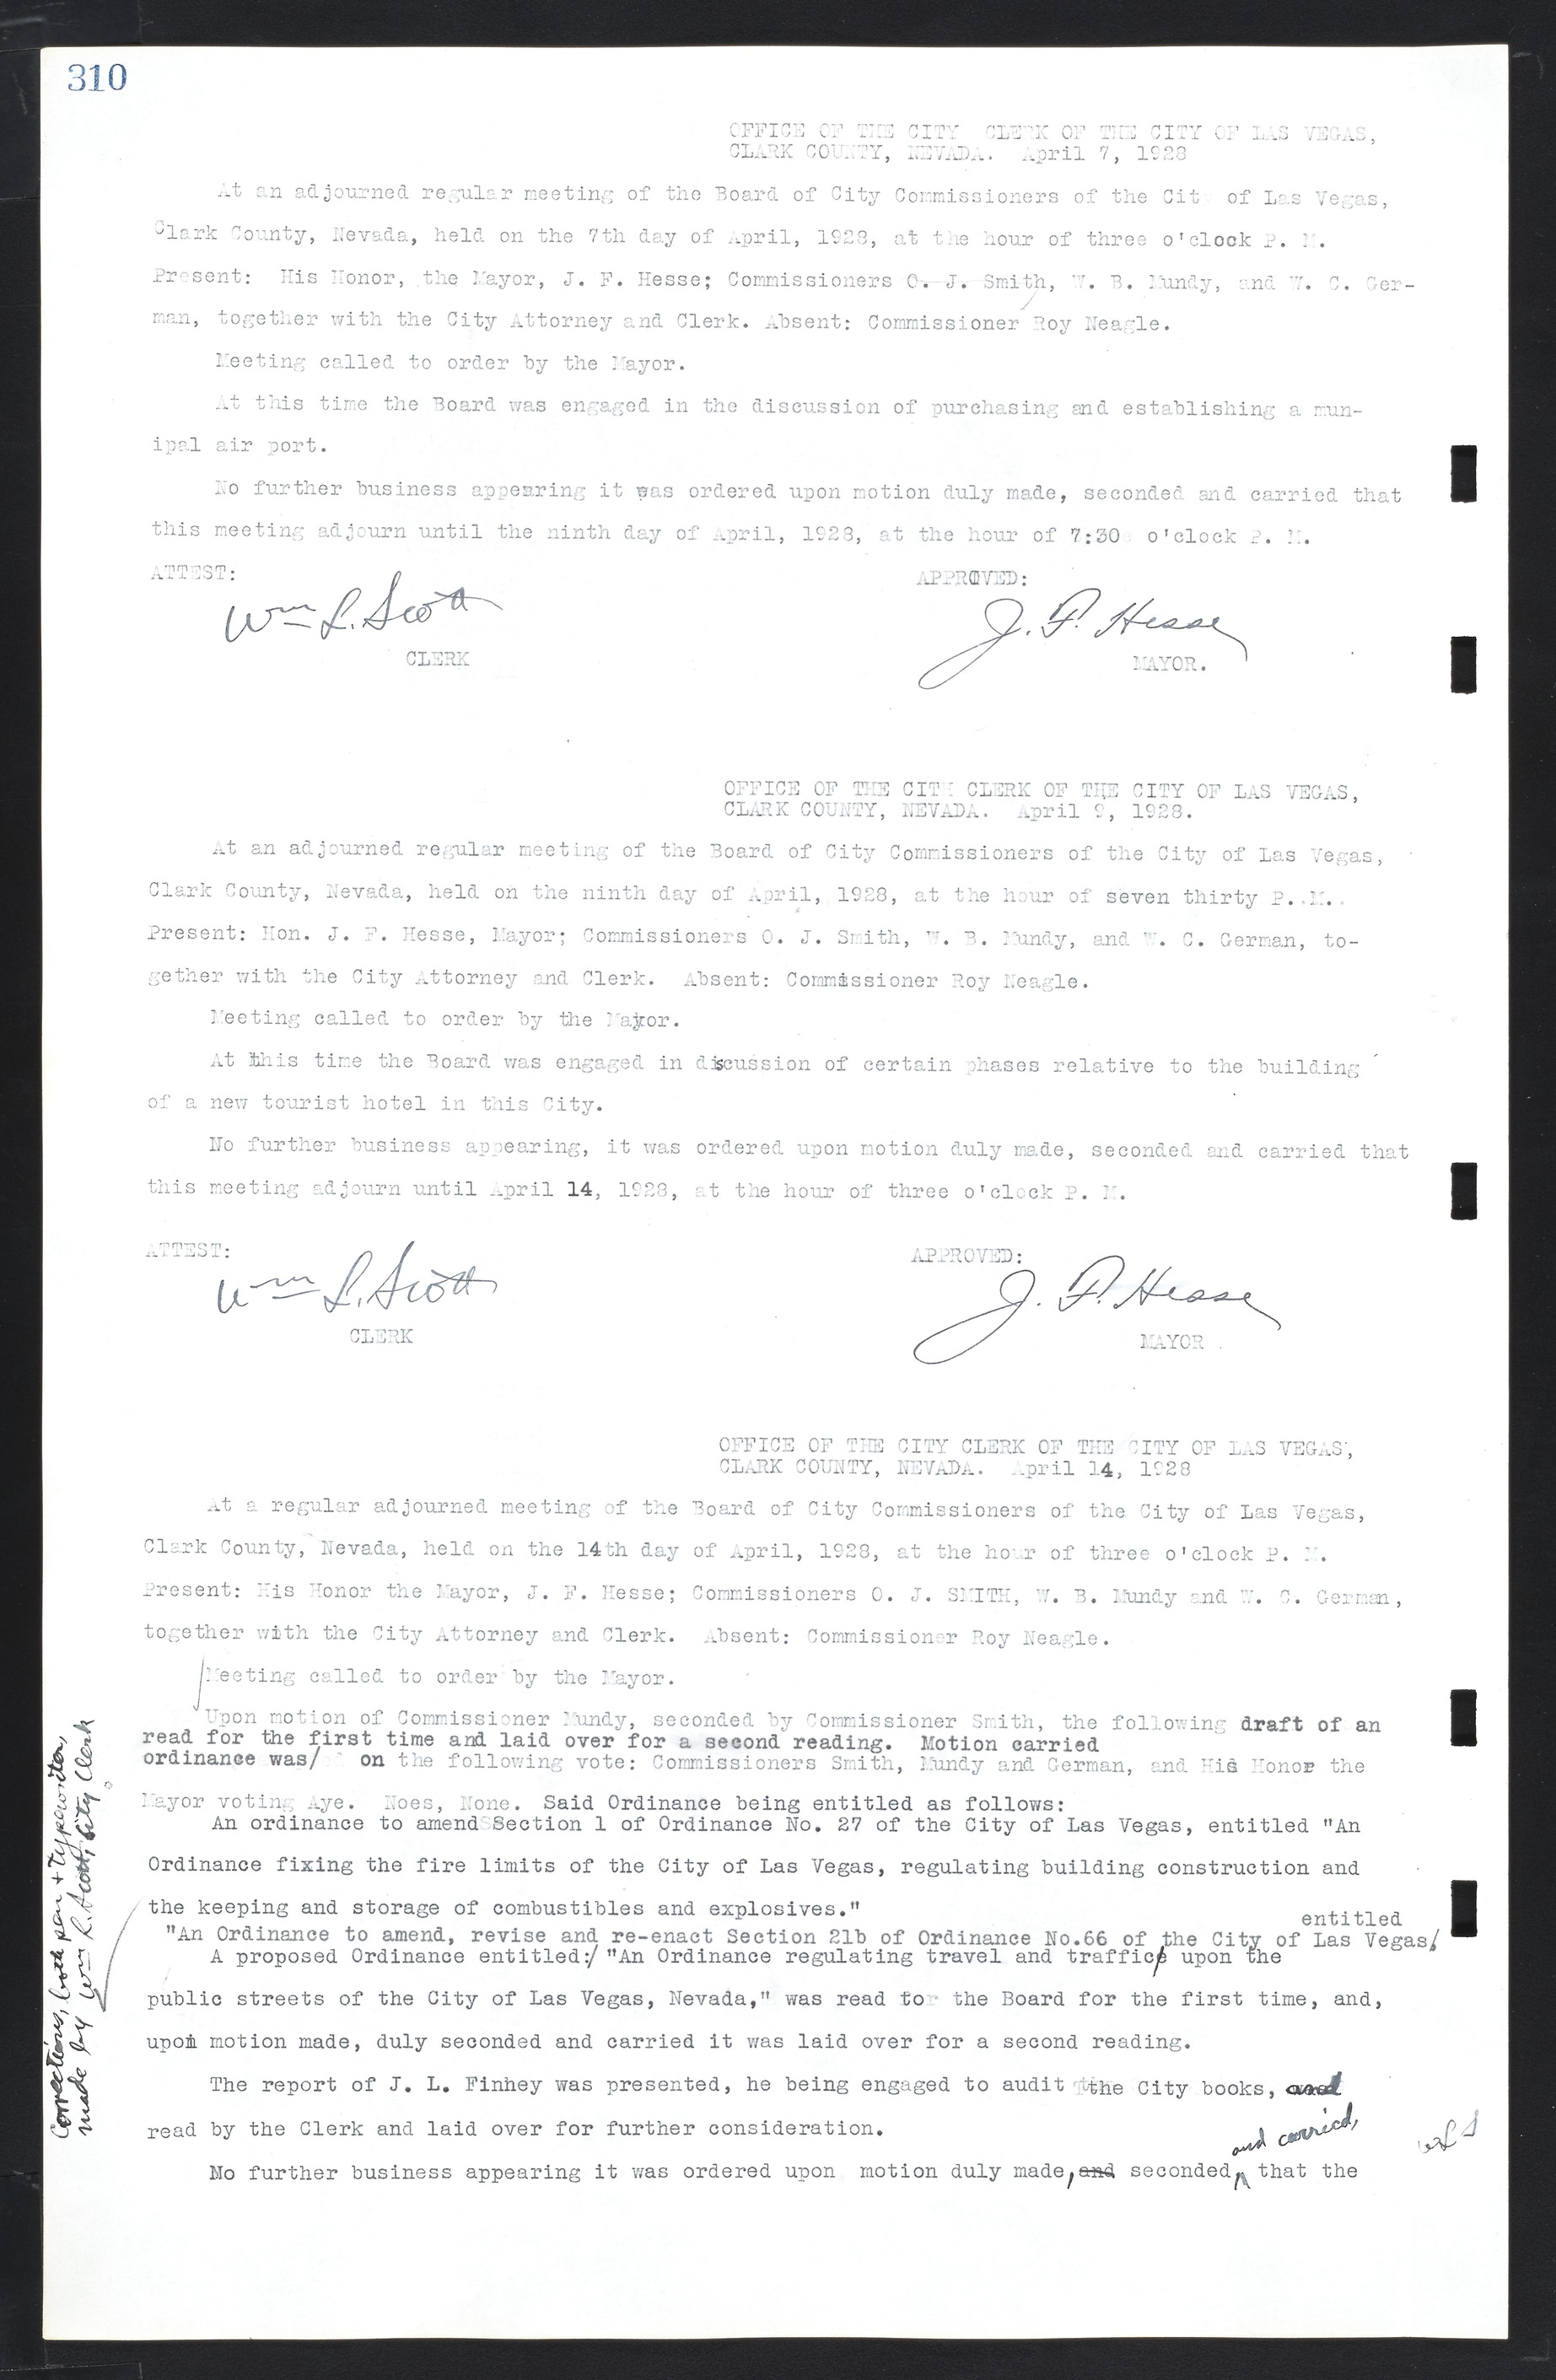 Las Vegas City Commission Minutes, March 1, 1922 to May 10, 1929, lvc000002-319